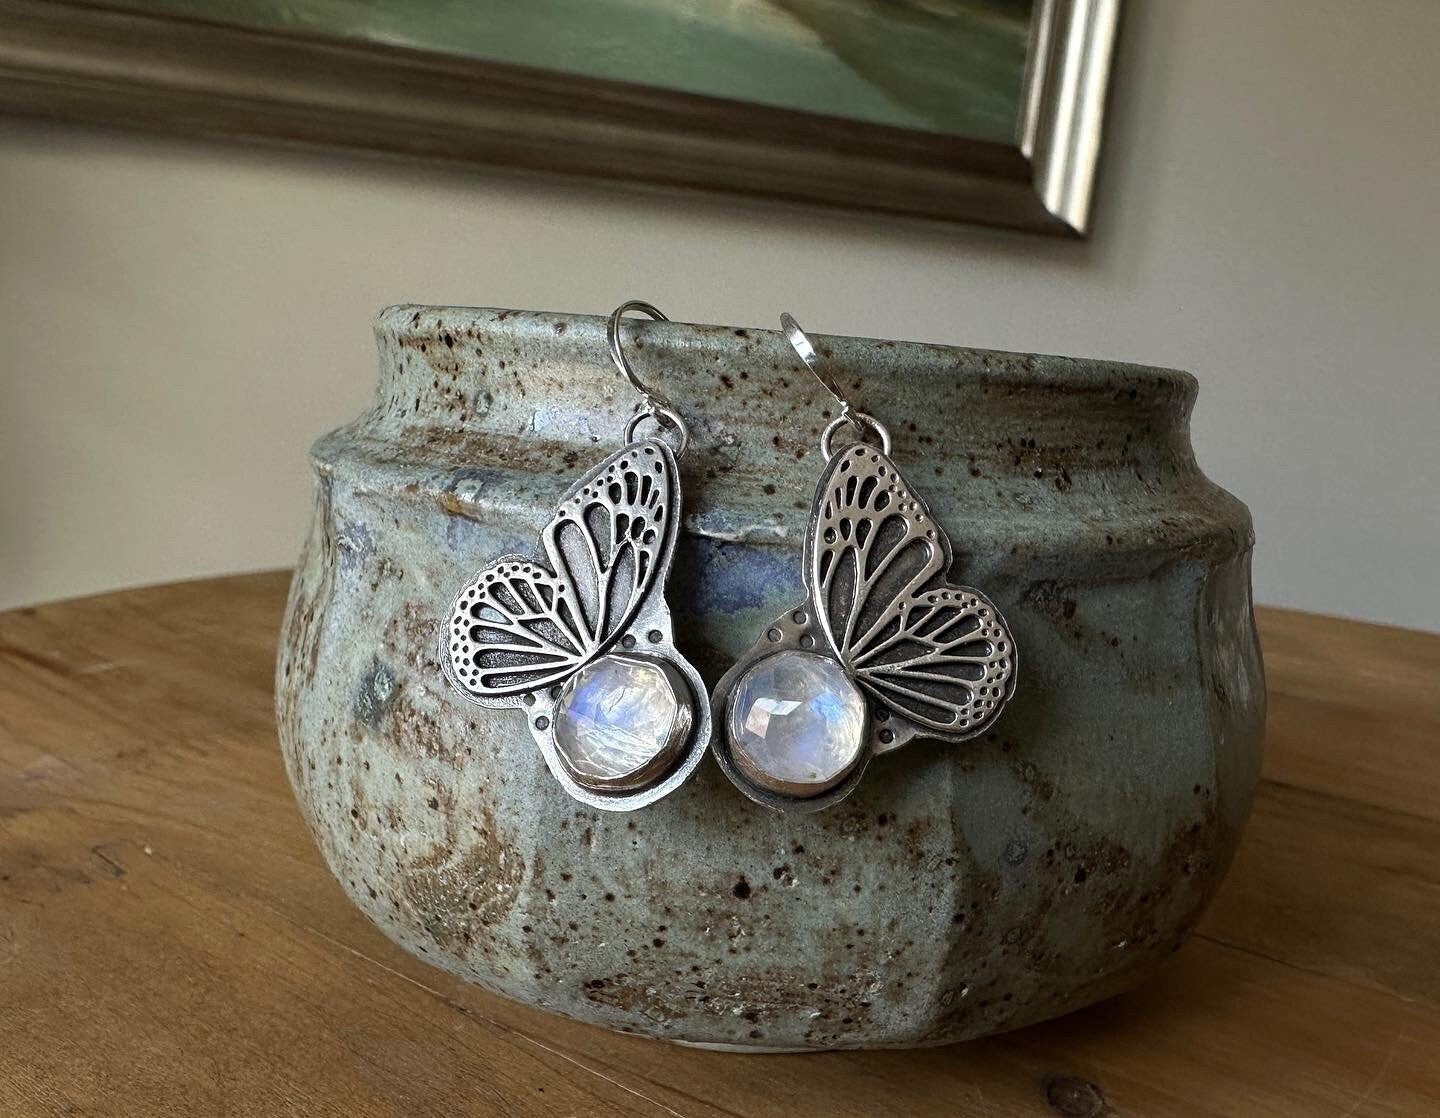 Butterfly earrings set with rainbow moonstone, sterling silver butterfly earrings, moonstone earrings, dangle butterfly earrings